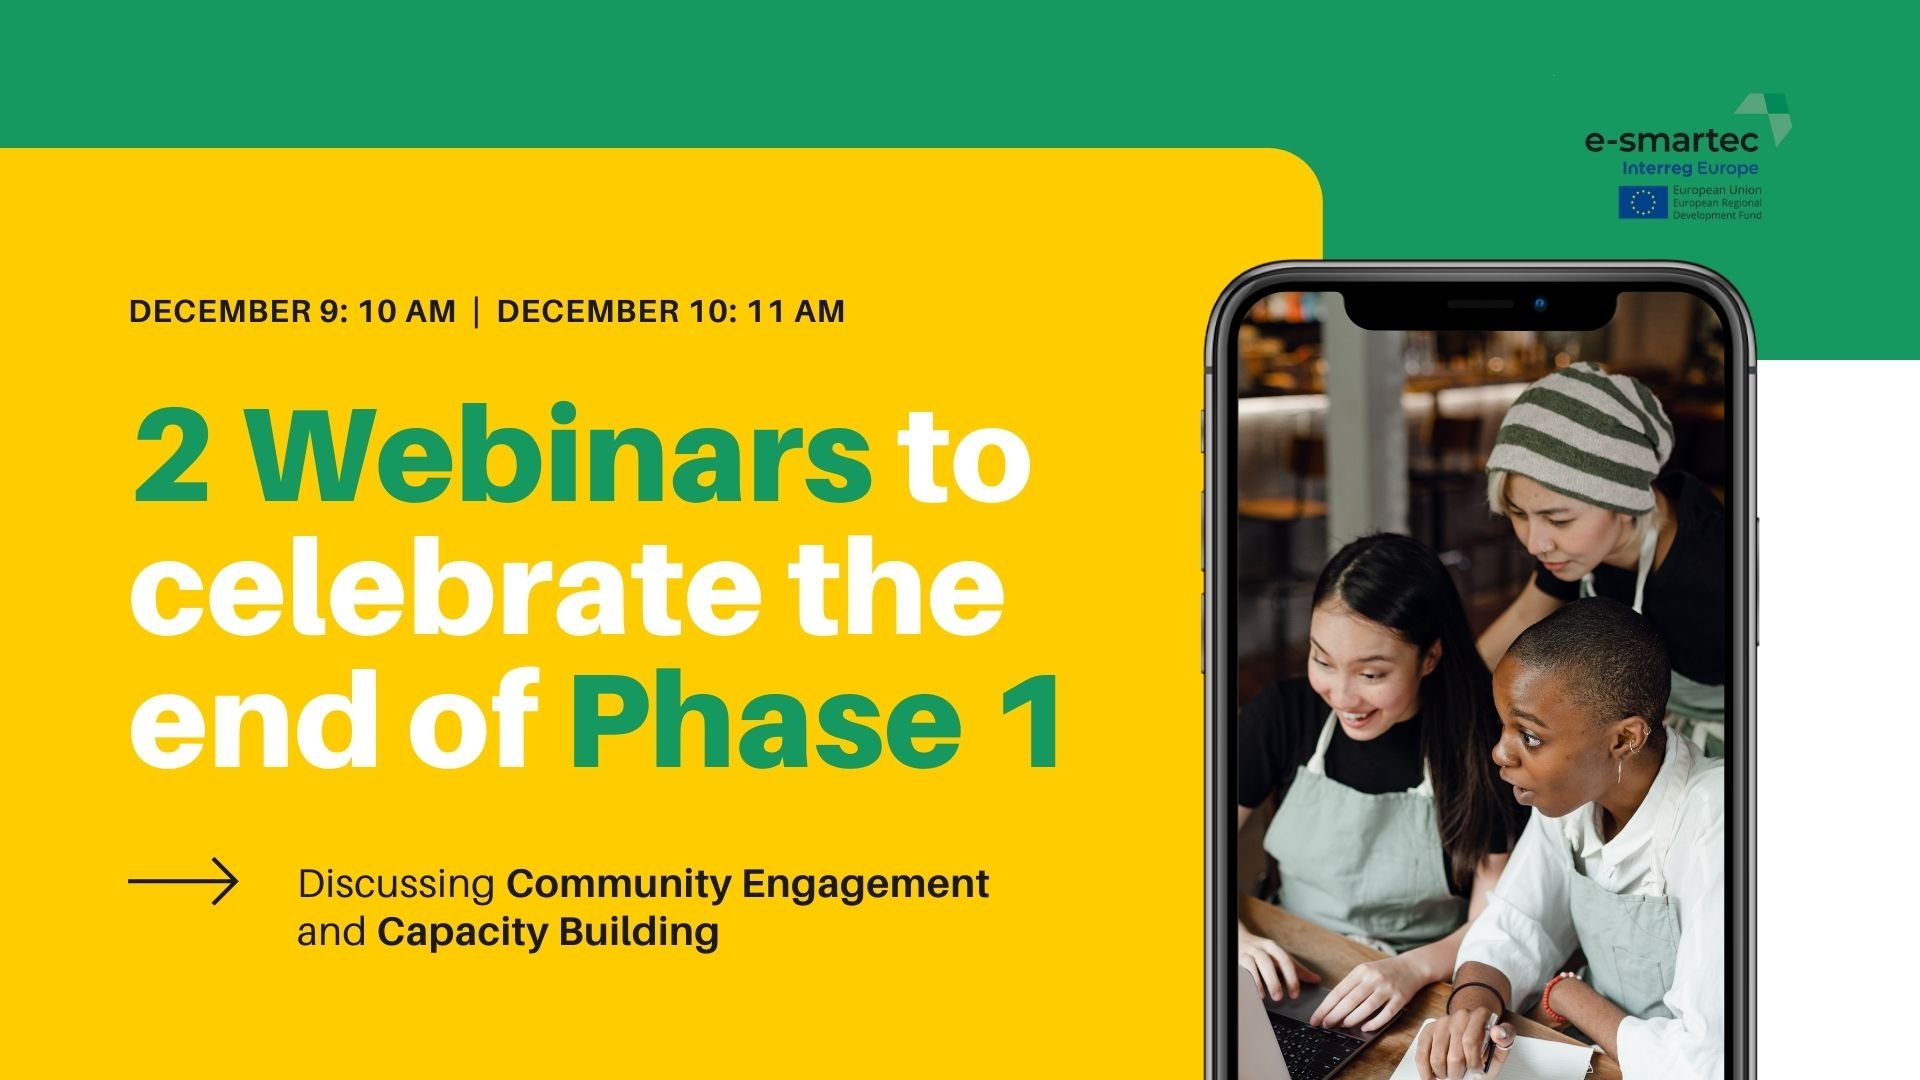 e-smartec: 2 webinars for the end of Phase 1!